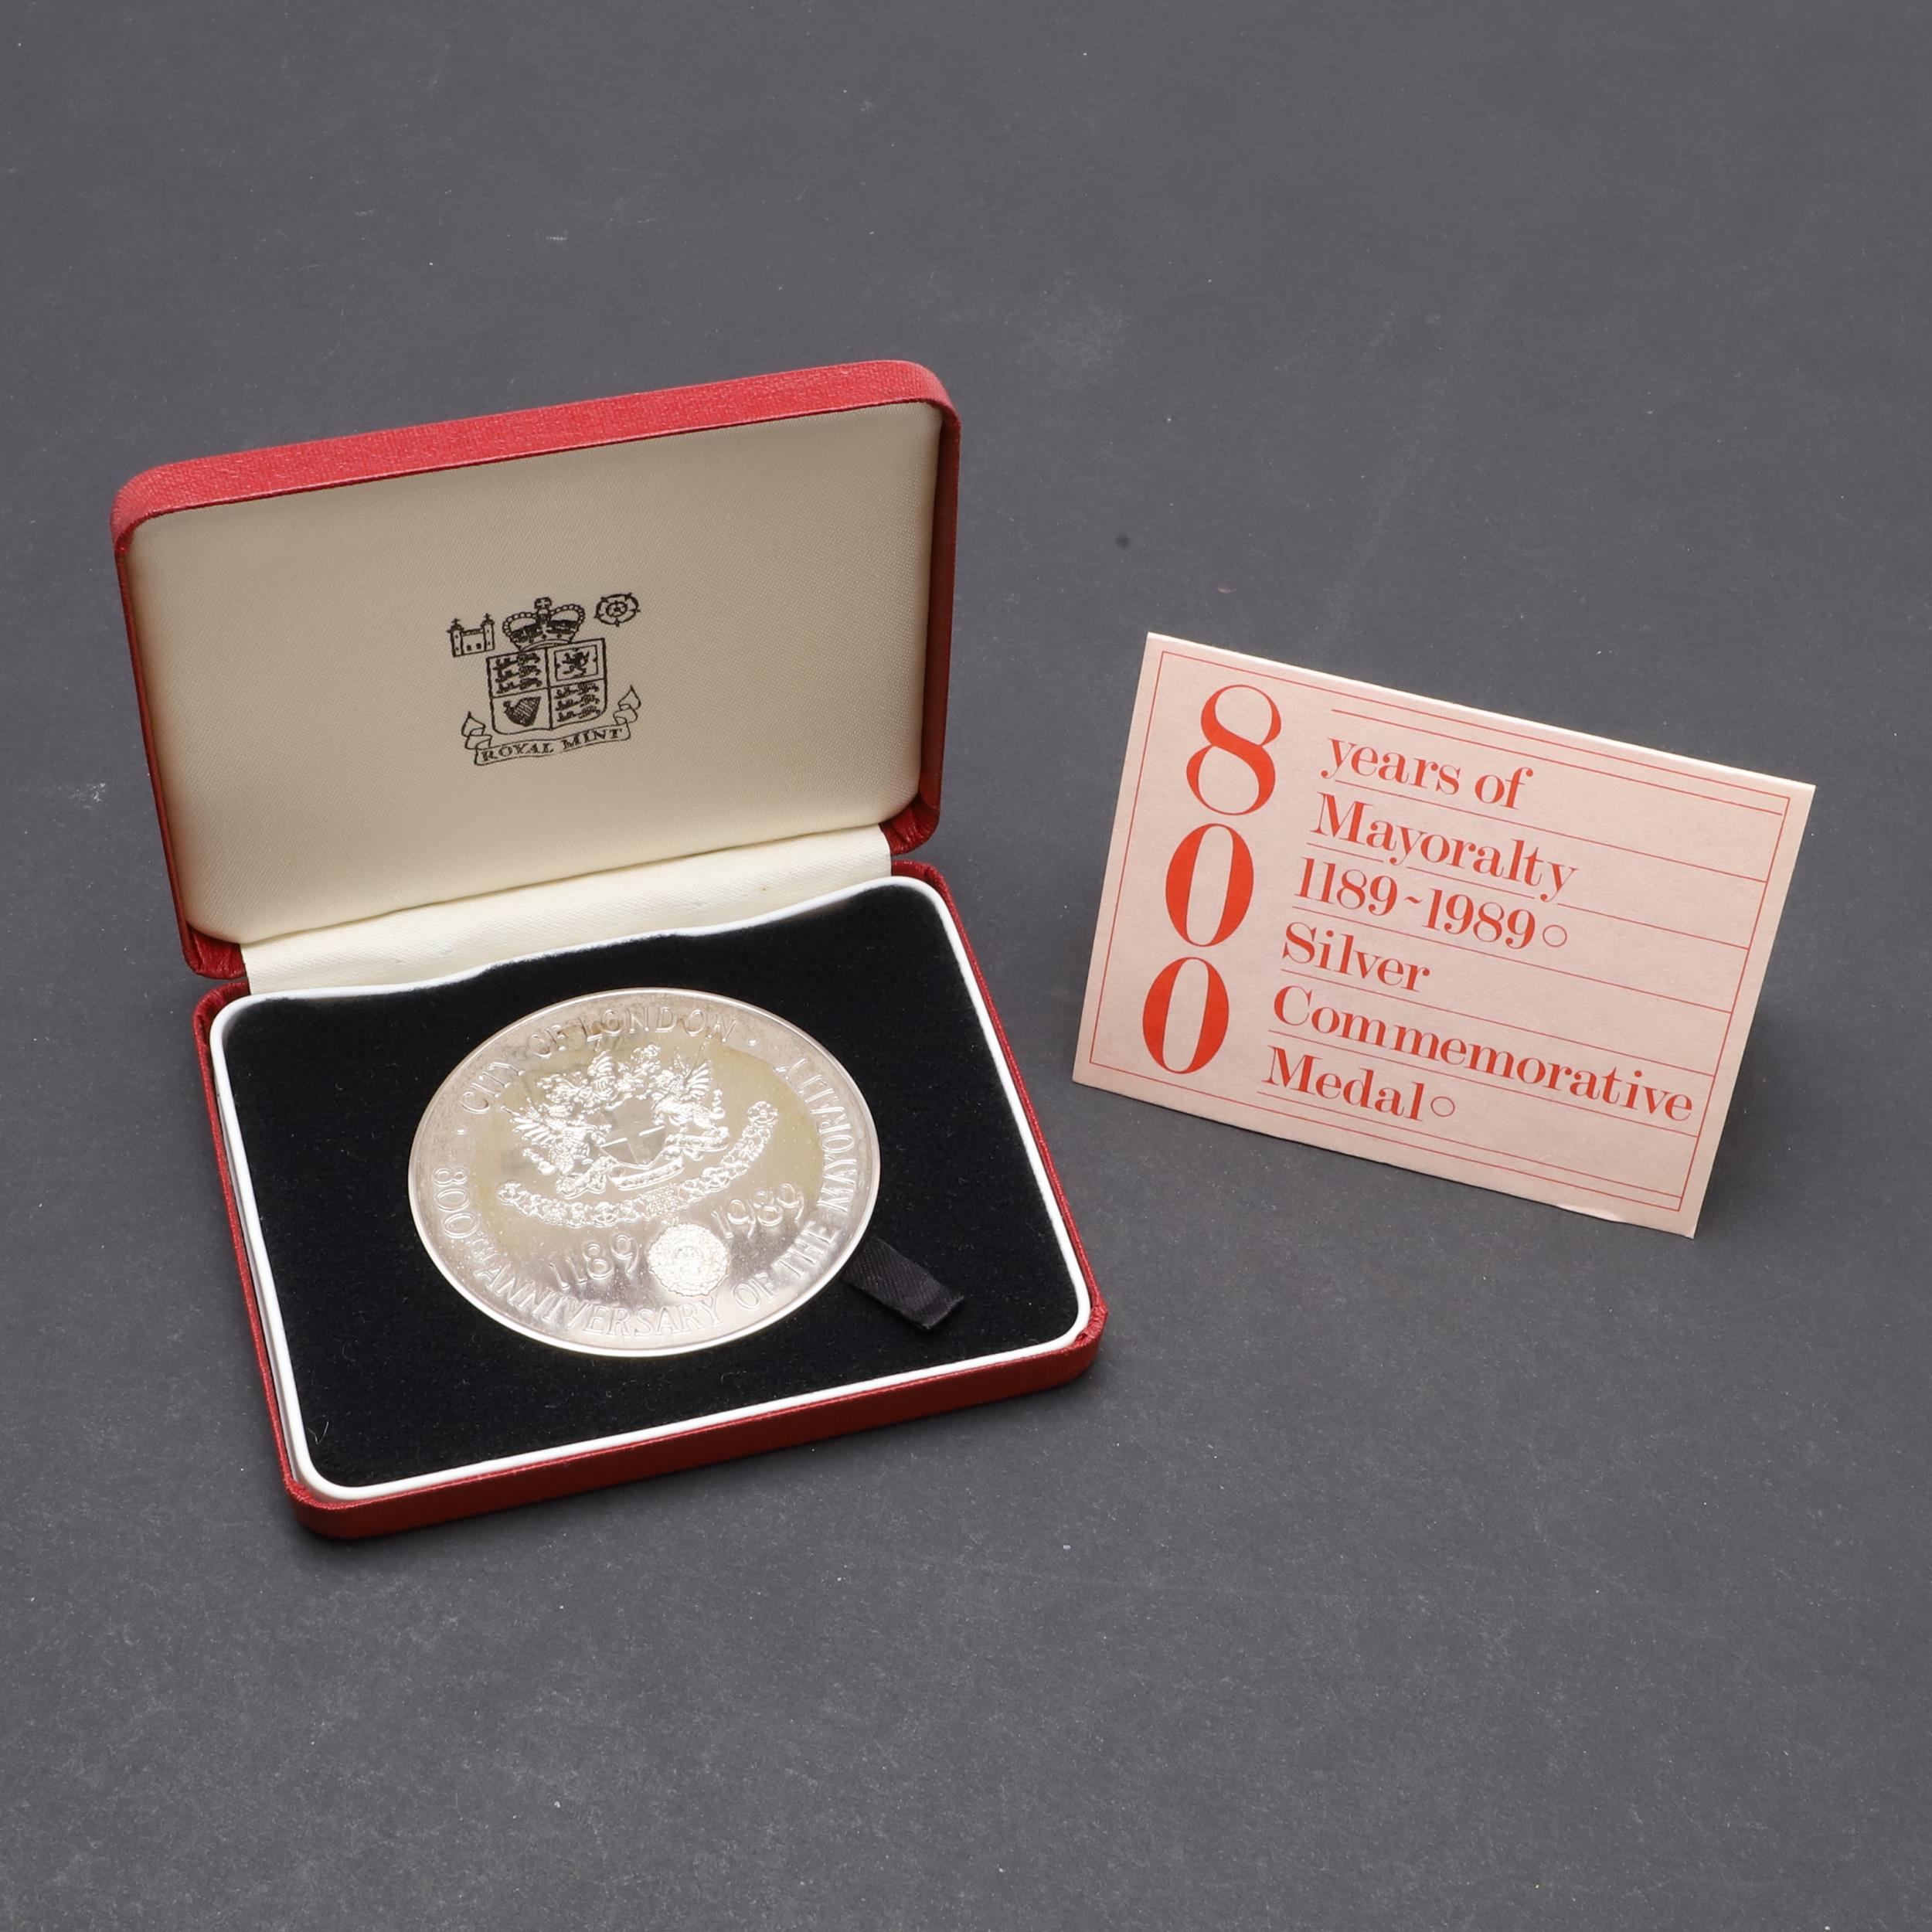 A SILVER MEDAL MARKING THE 800TH ANNIVERSARY OF THE CITY OF LONDON, 1989.